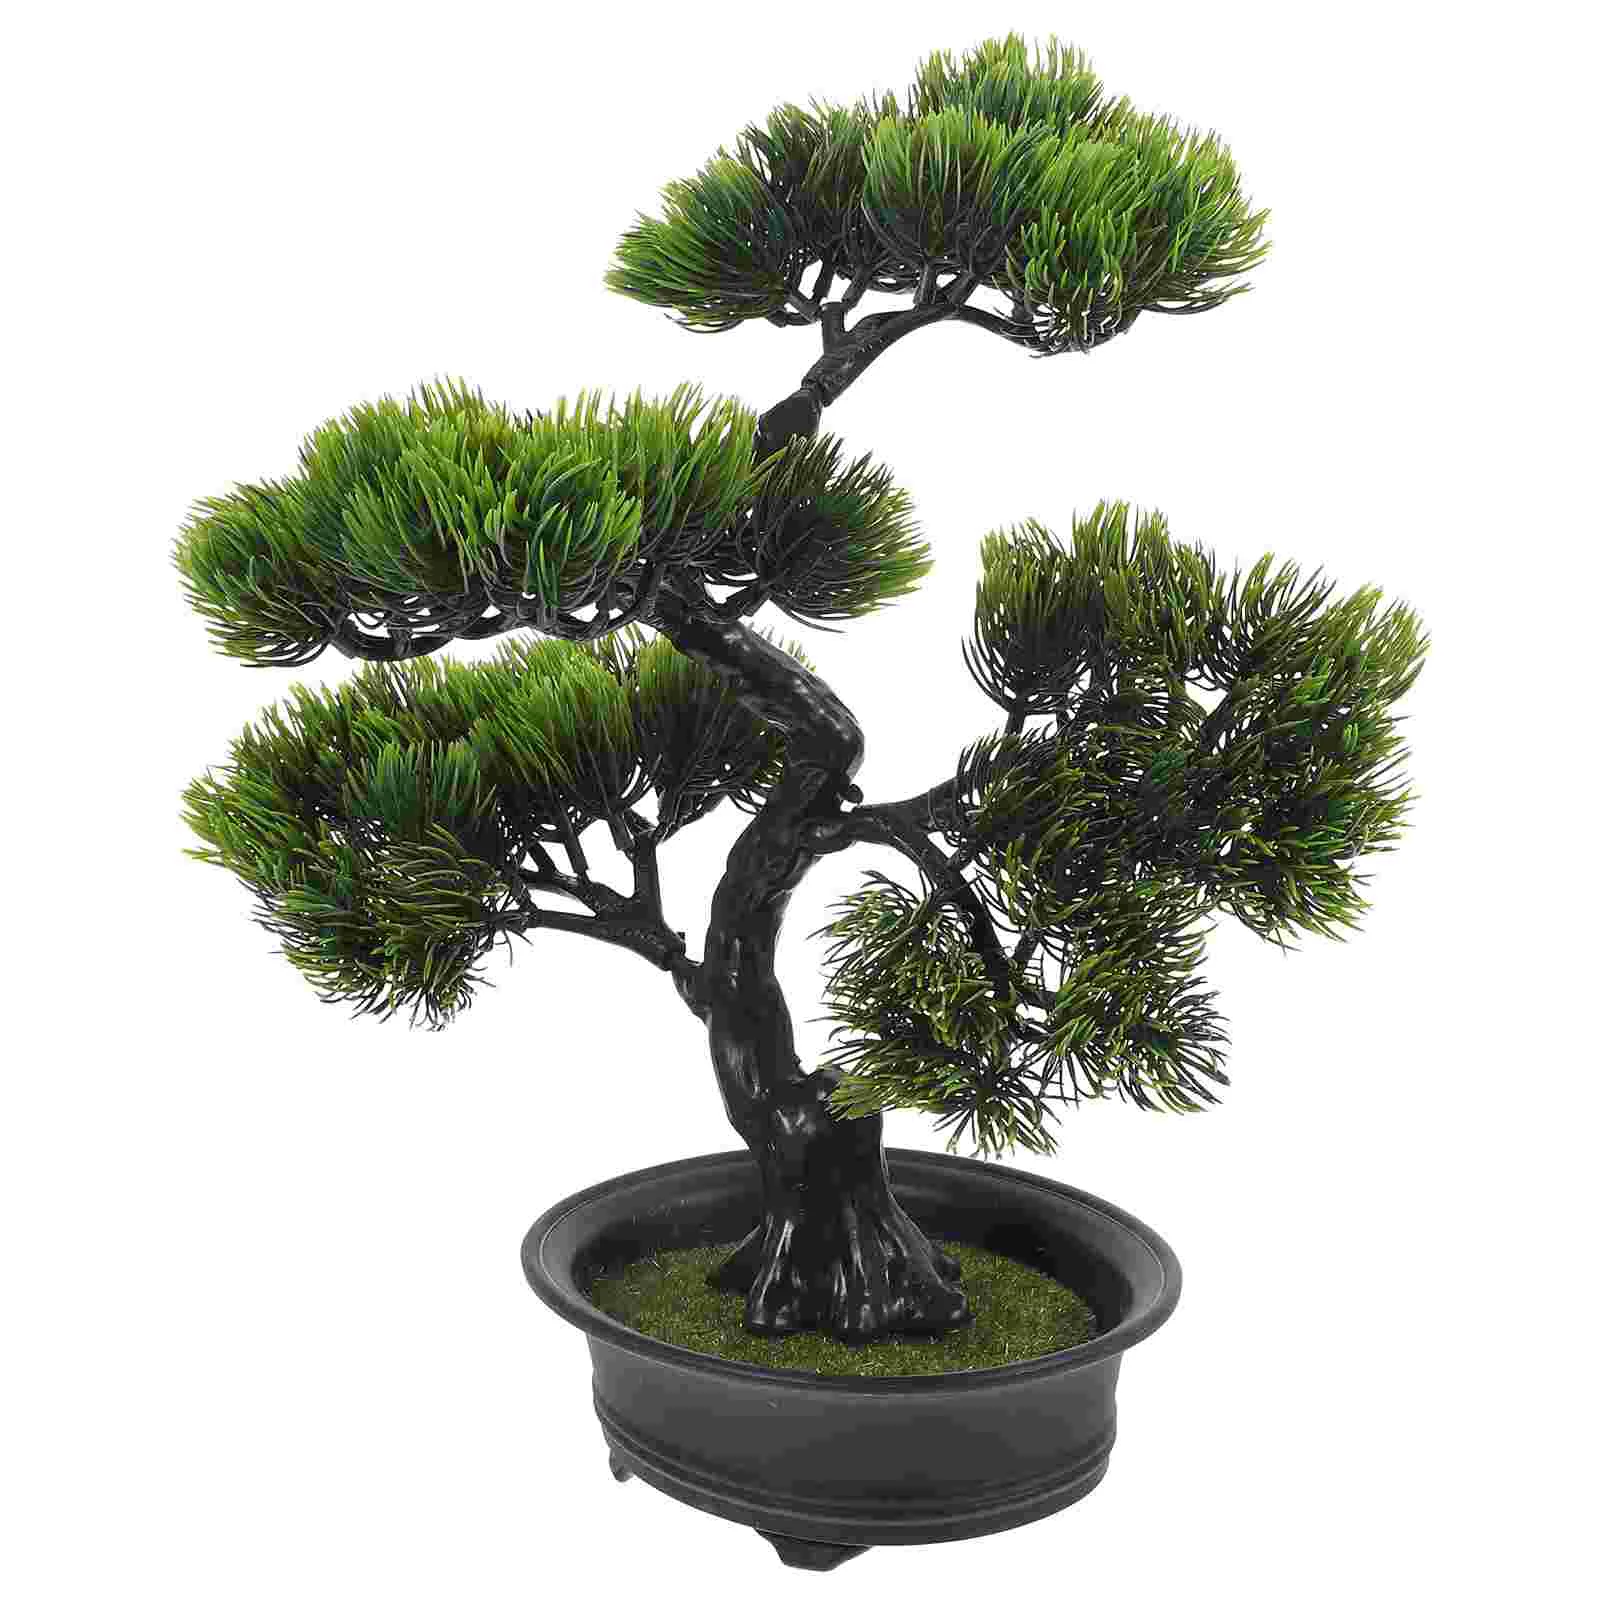 

Artificial Potted Indoor Plants Desk Decorations Pine Wood Fake Home Outdoor Decoration Realistic Abs Bonsai Tree